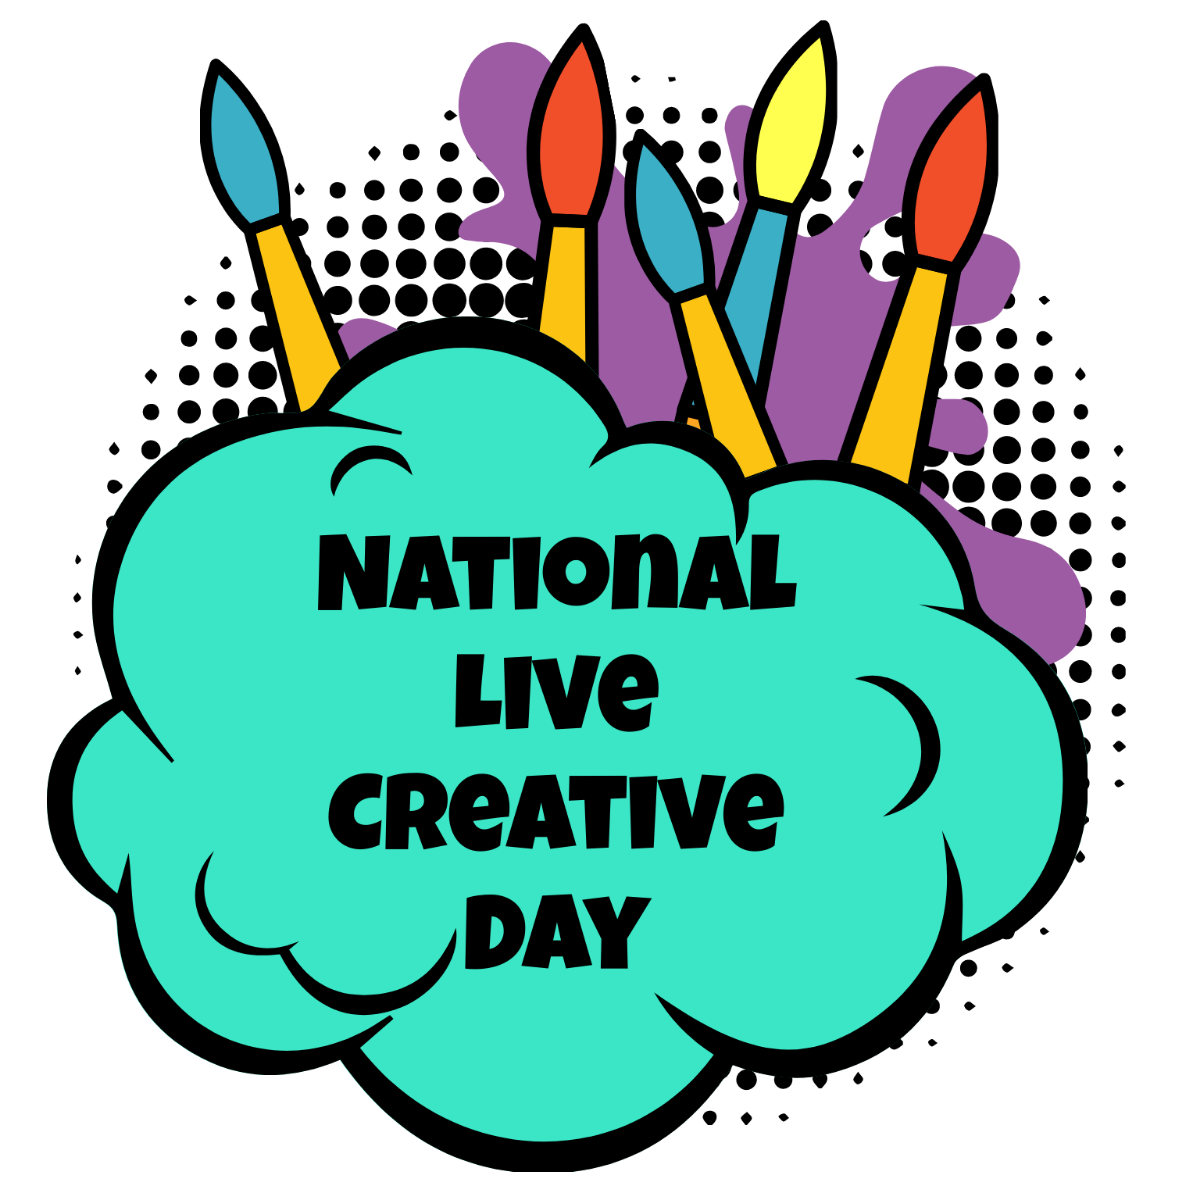 National Live Creative Day Drawing Vector